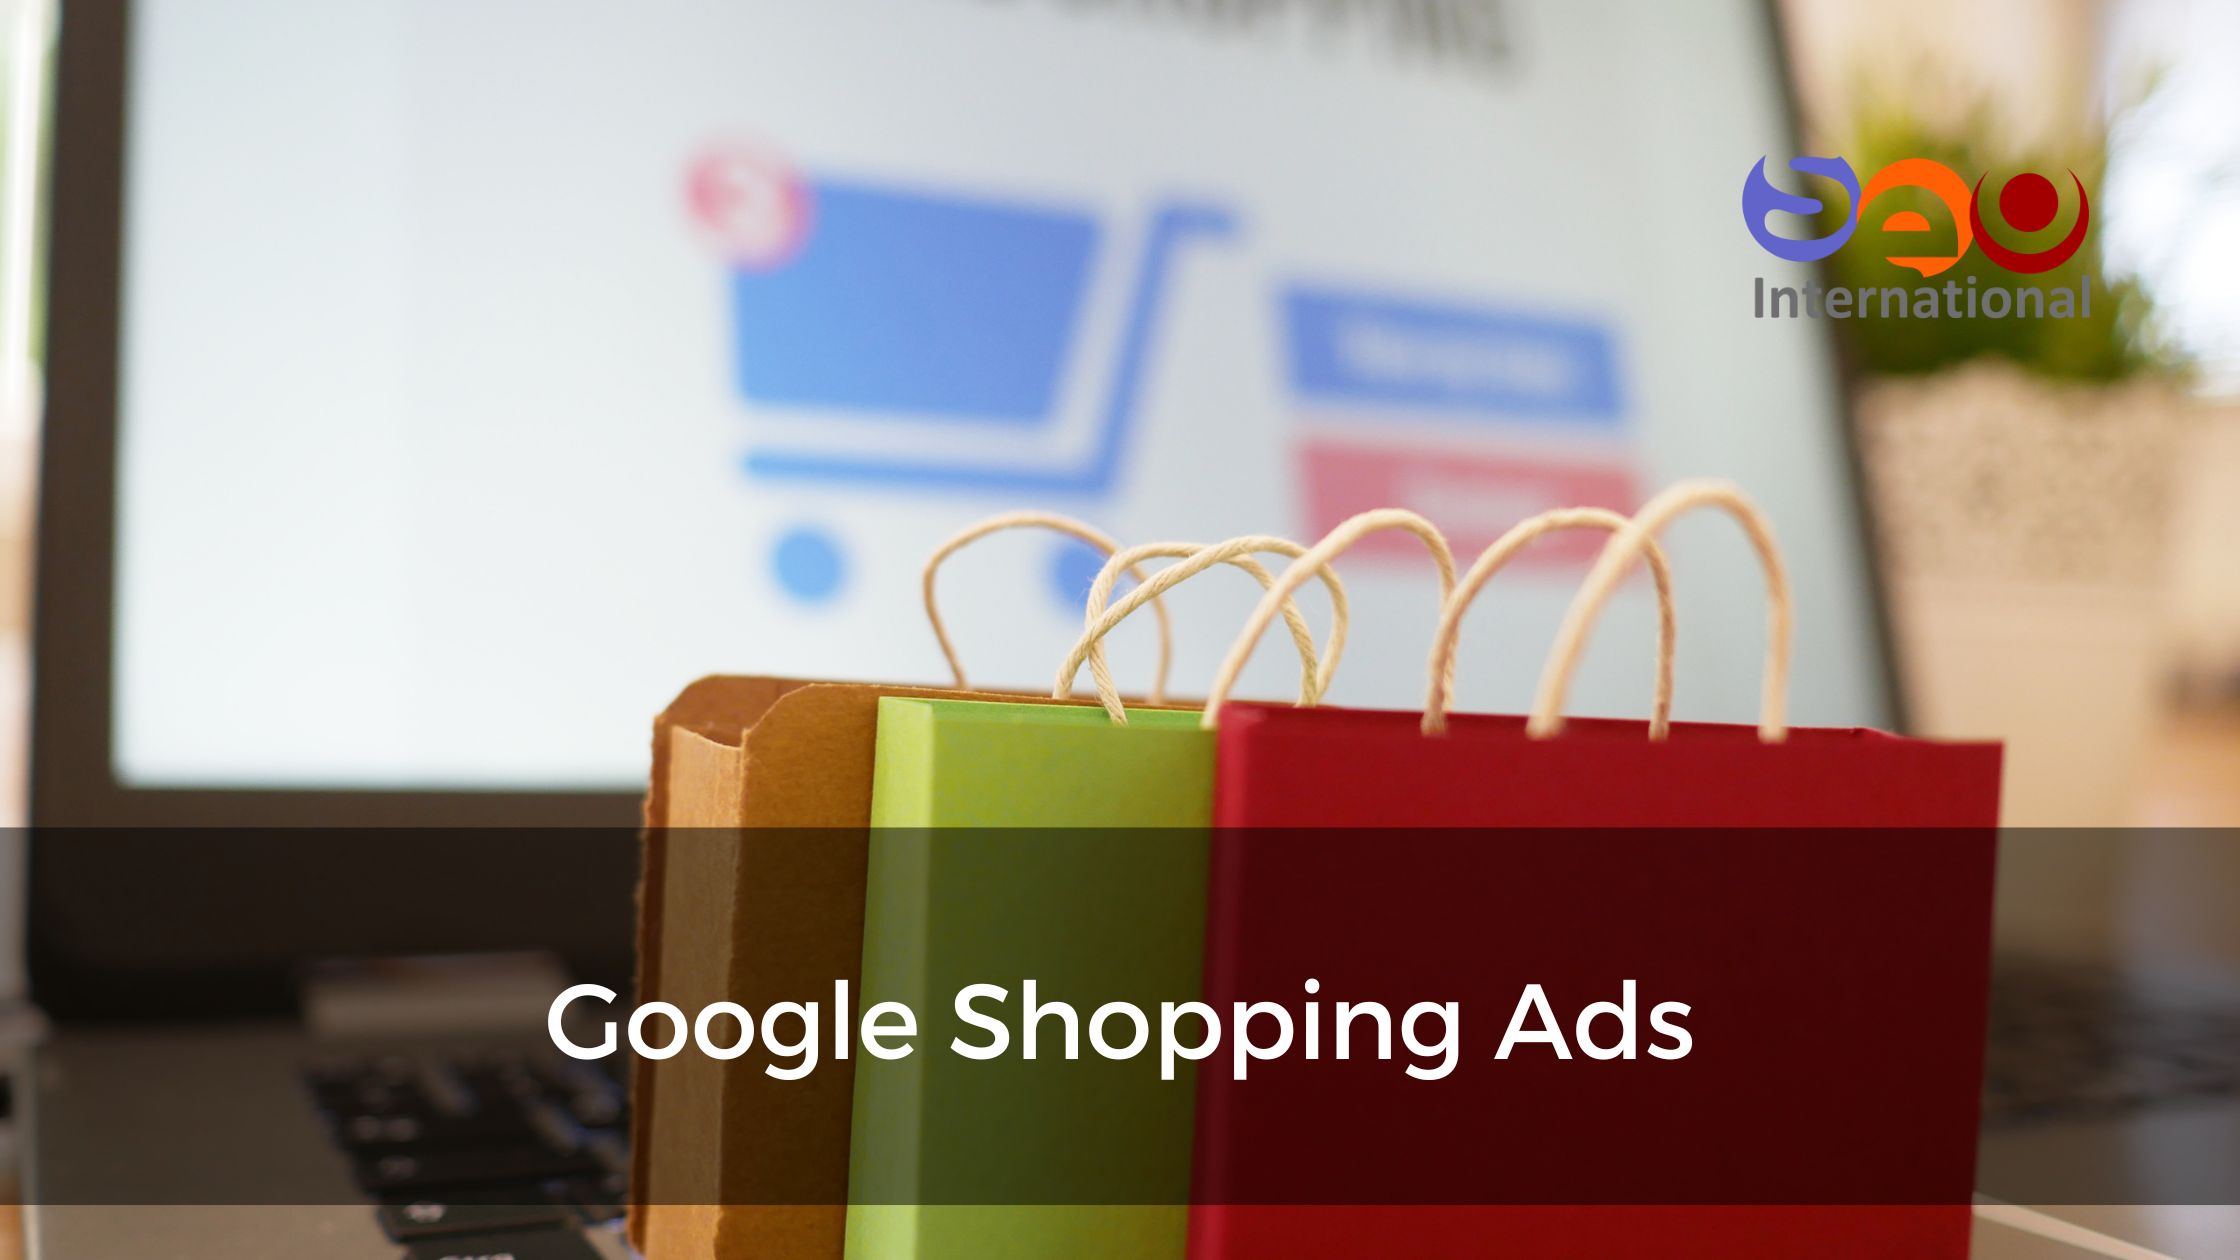 Google Shopping Ads - How to setup Google Shopping campaigns?